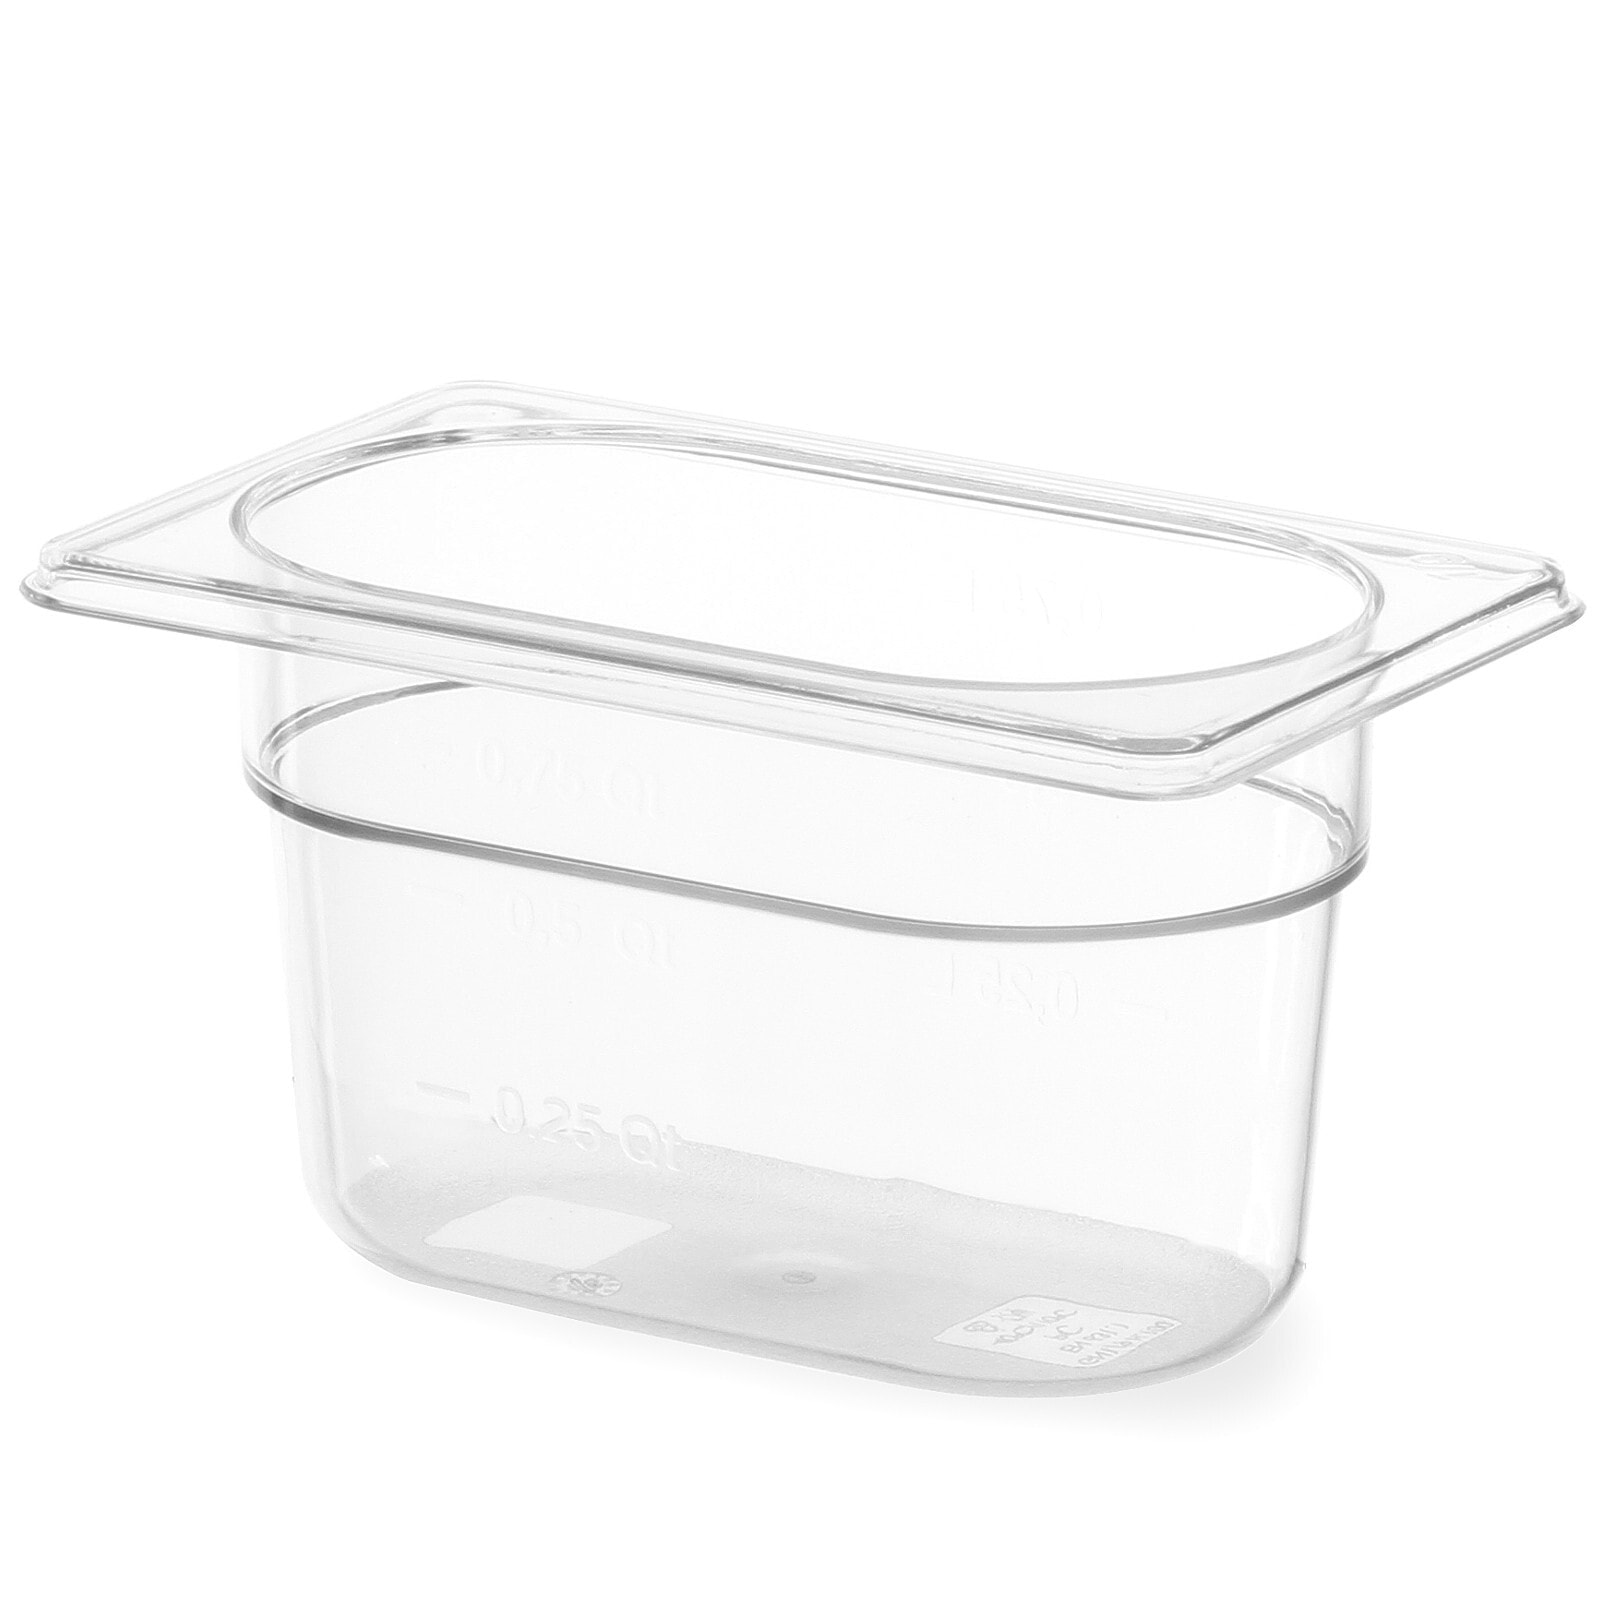 Transparent GN container made of polycarbonate GN 1/9, height 100 mm - Hendi 861820